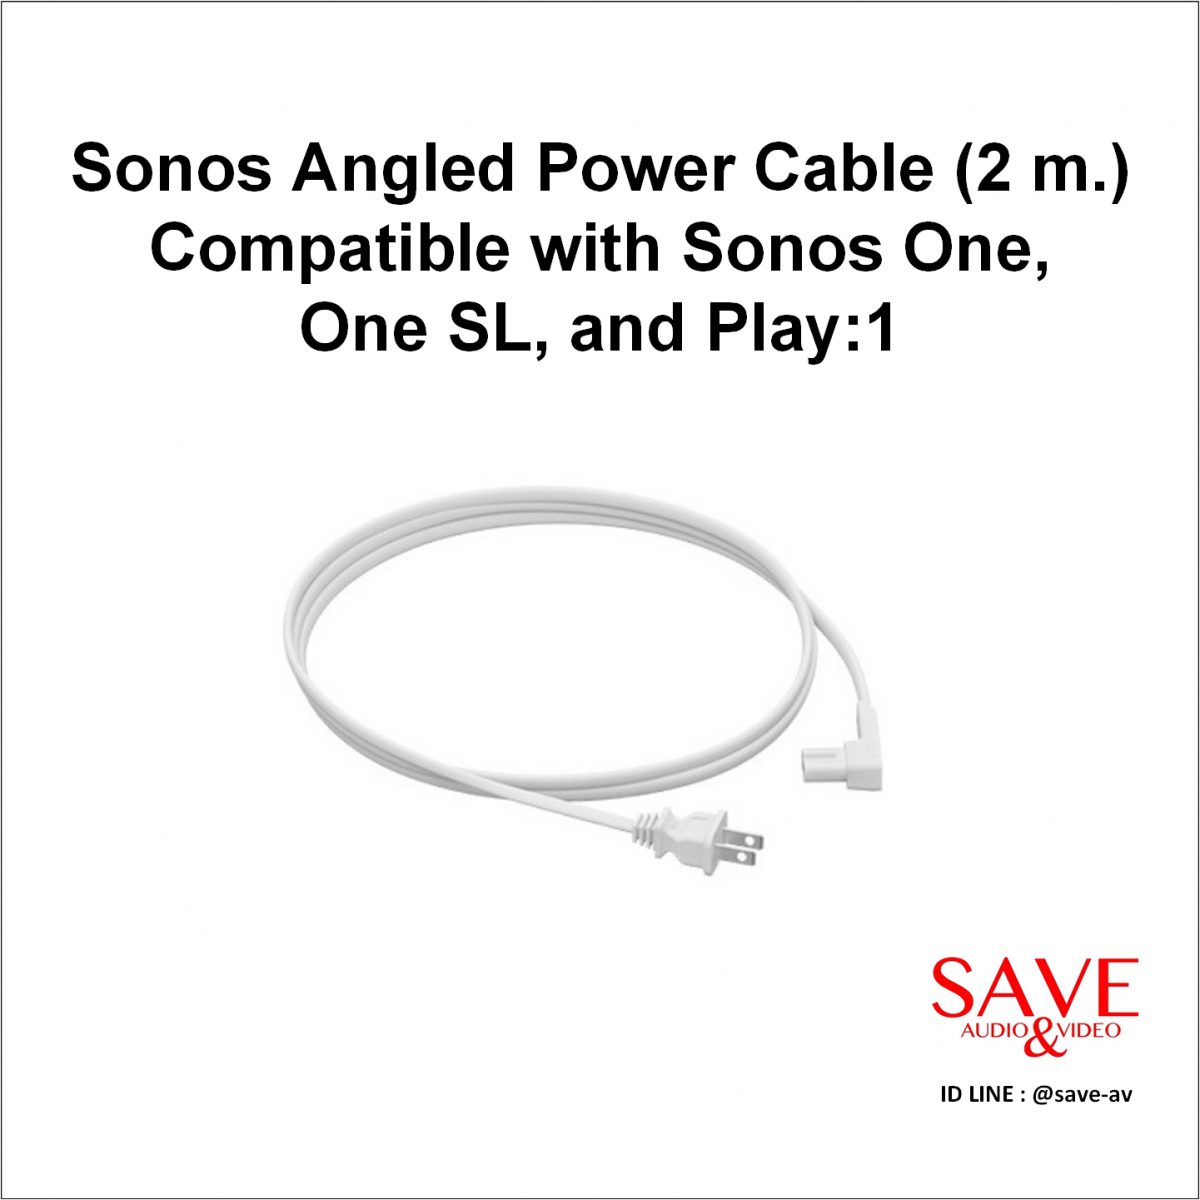 Sonos Angled Power Cable (2 m.)-w